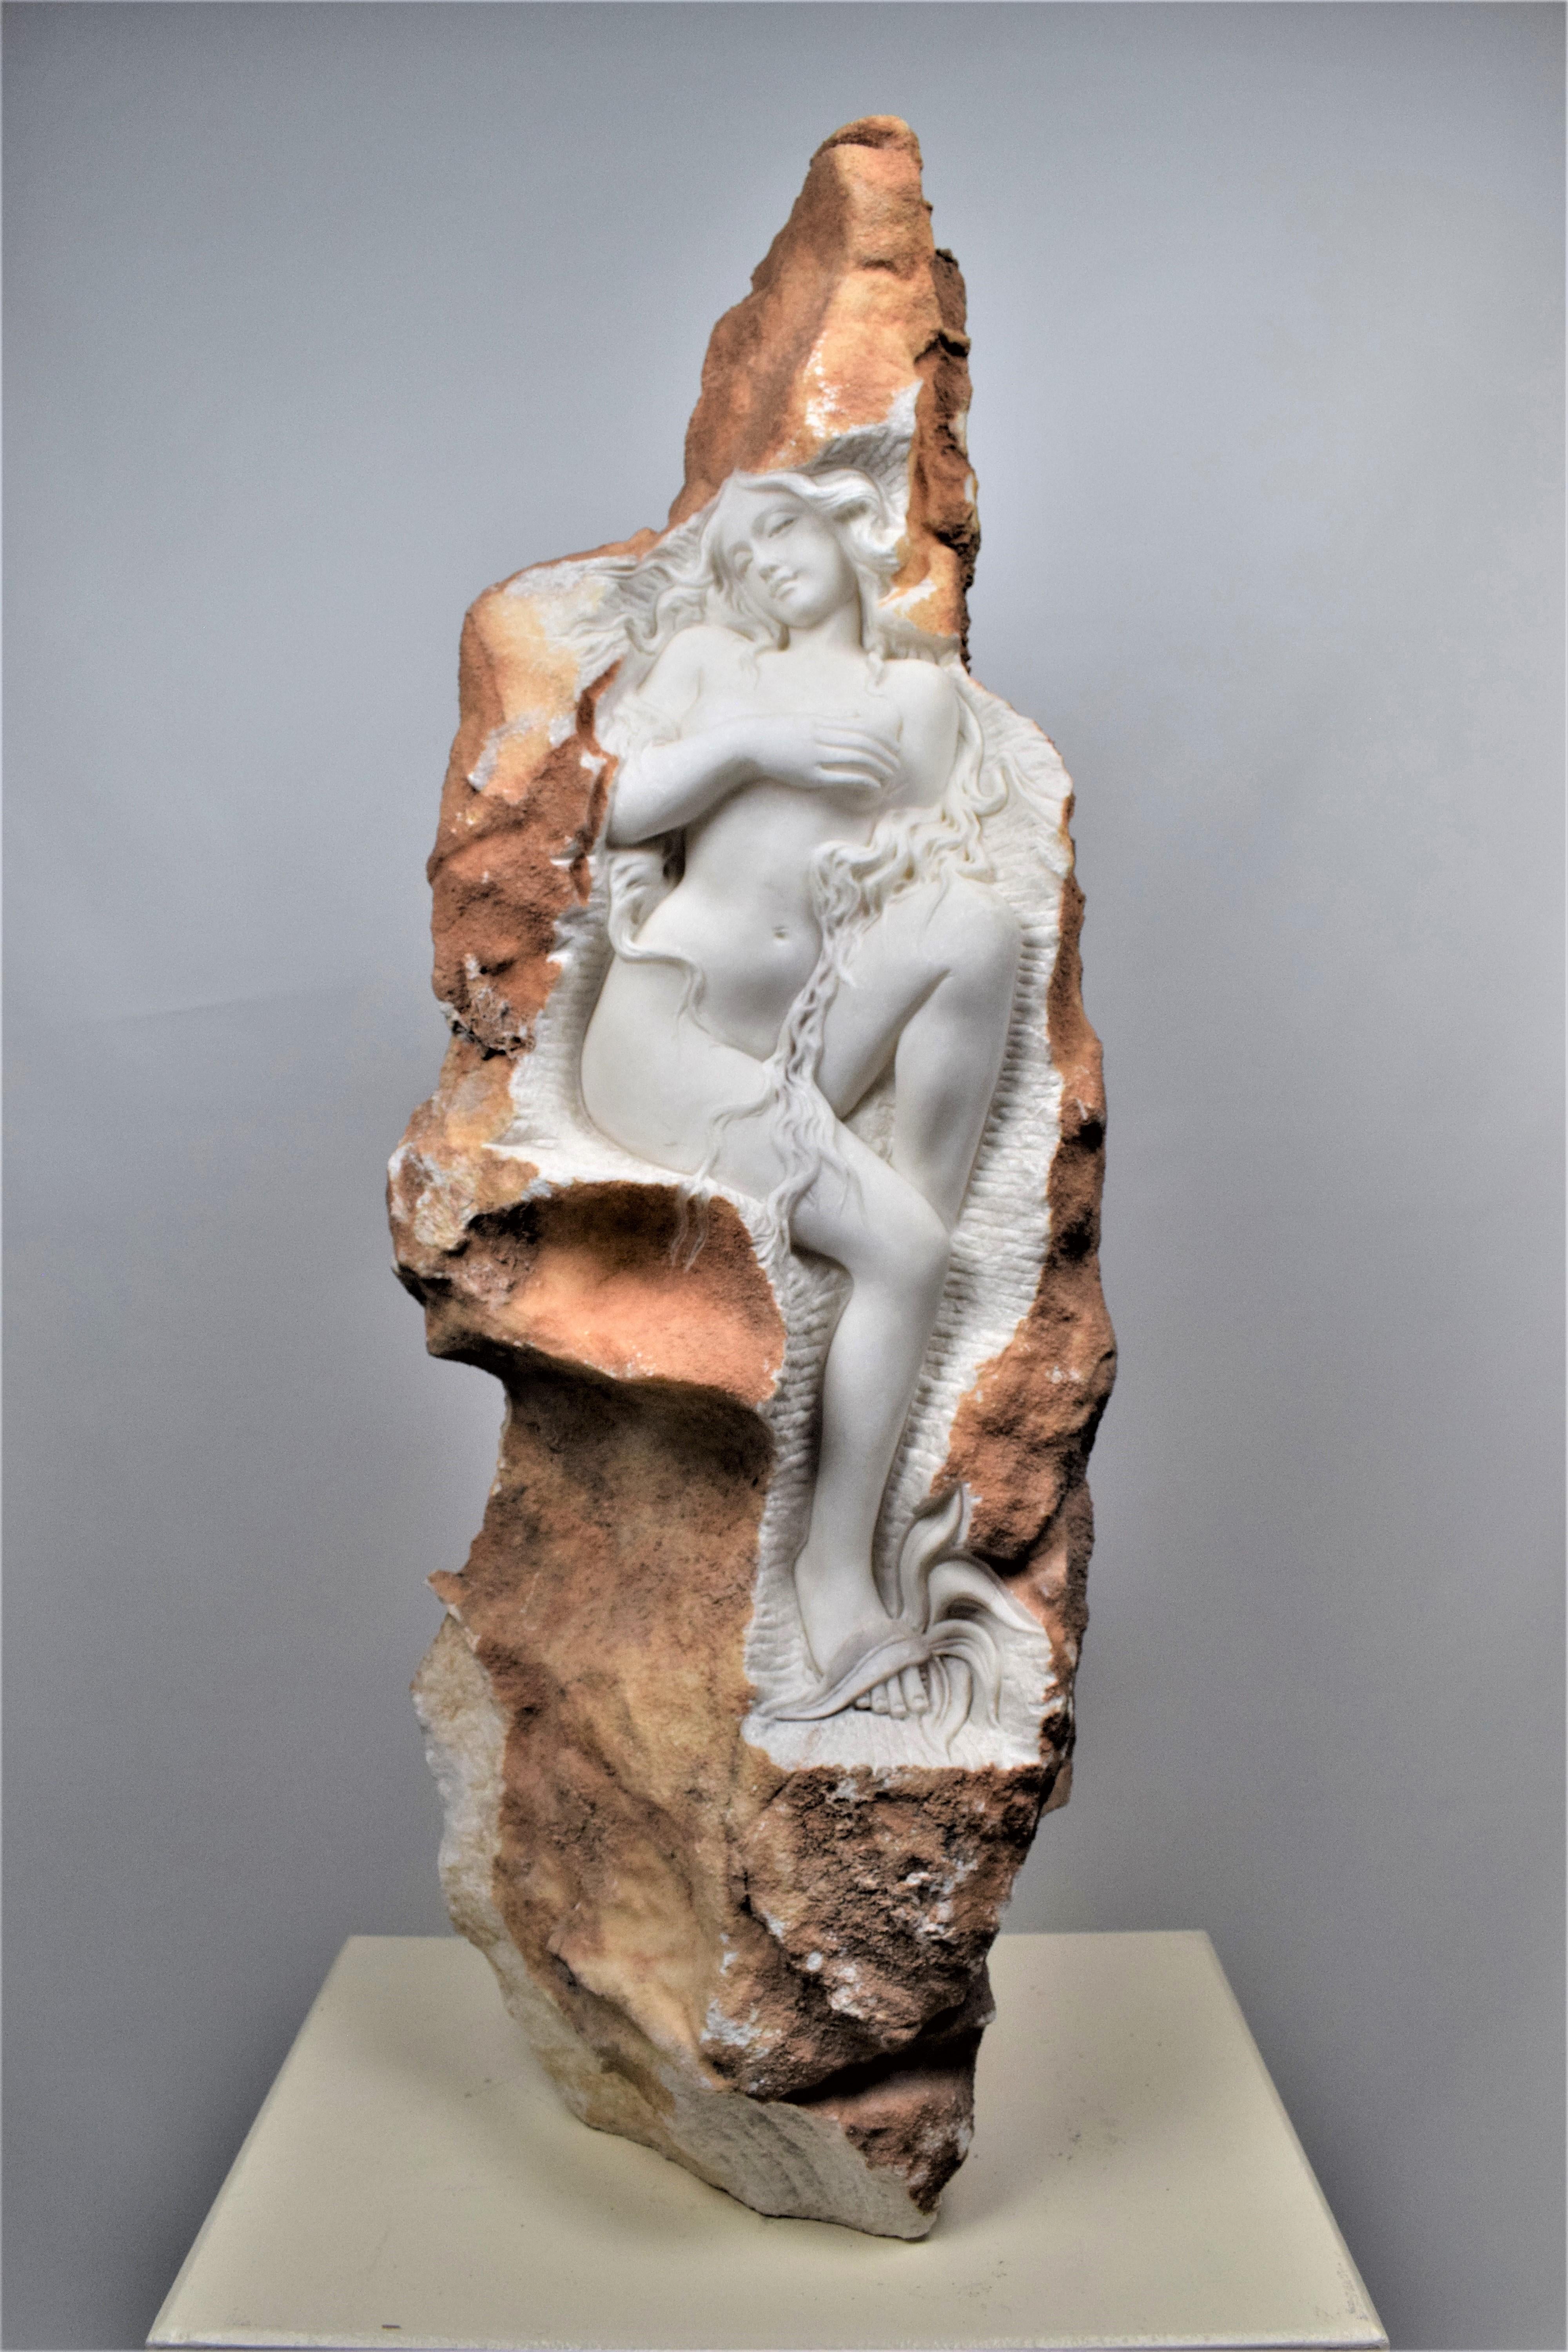 Italian contemporary Woman marble sculpture

A stunning and extremely high quality Italian white Carrara marble statue. The wonderfully executed statue depicts a beautiful young woman sculpted, emerging from within the piece of marble. The